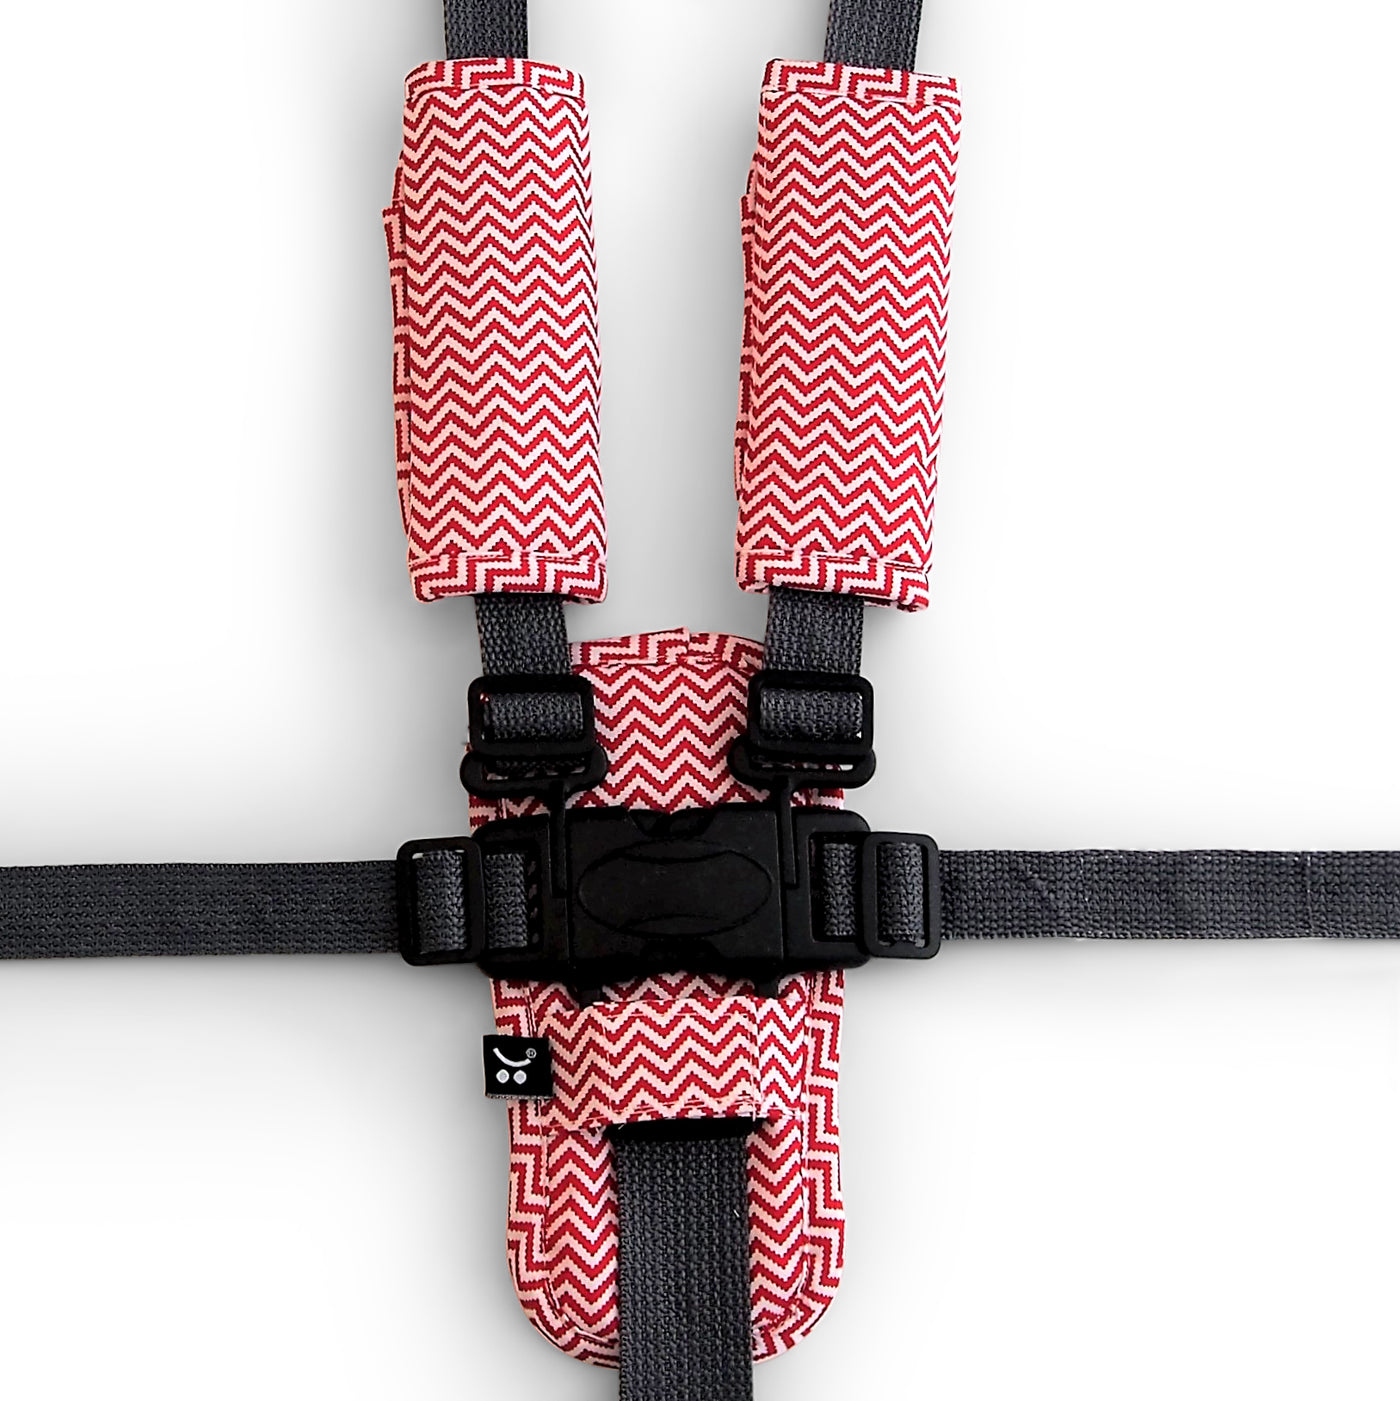 Harness Cover Strap Set - Red Zig Zag - Outlook Baby